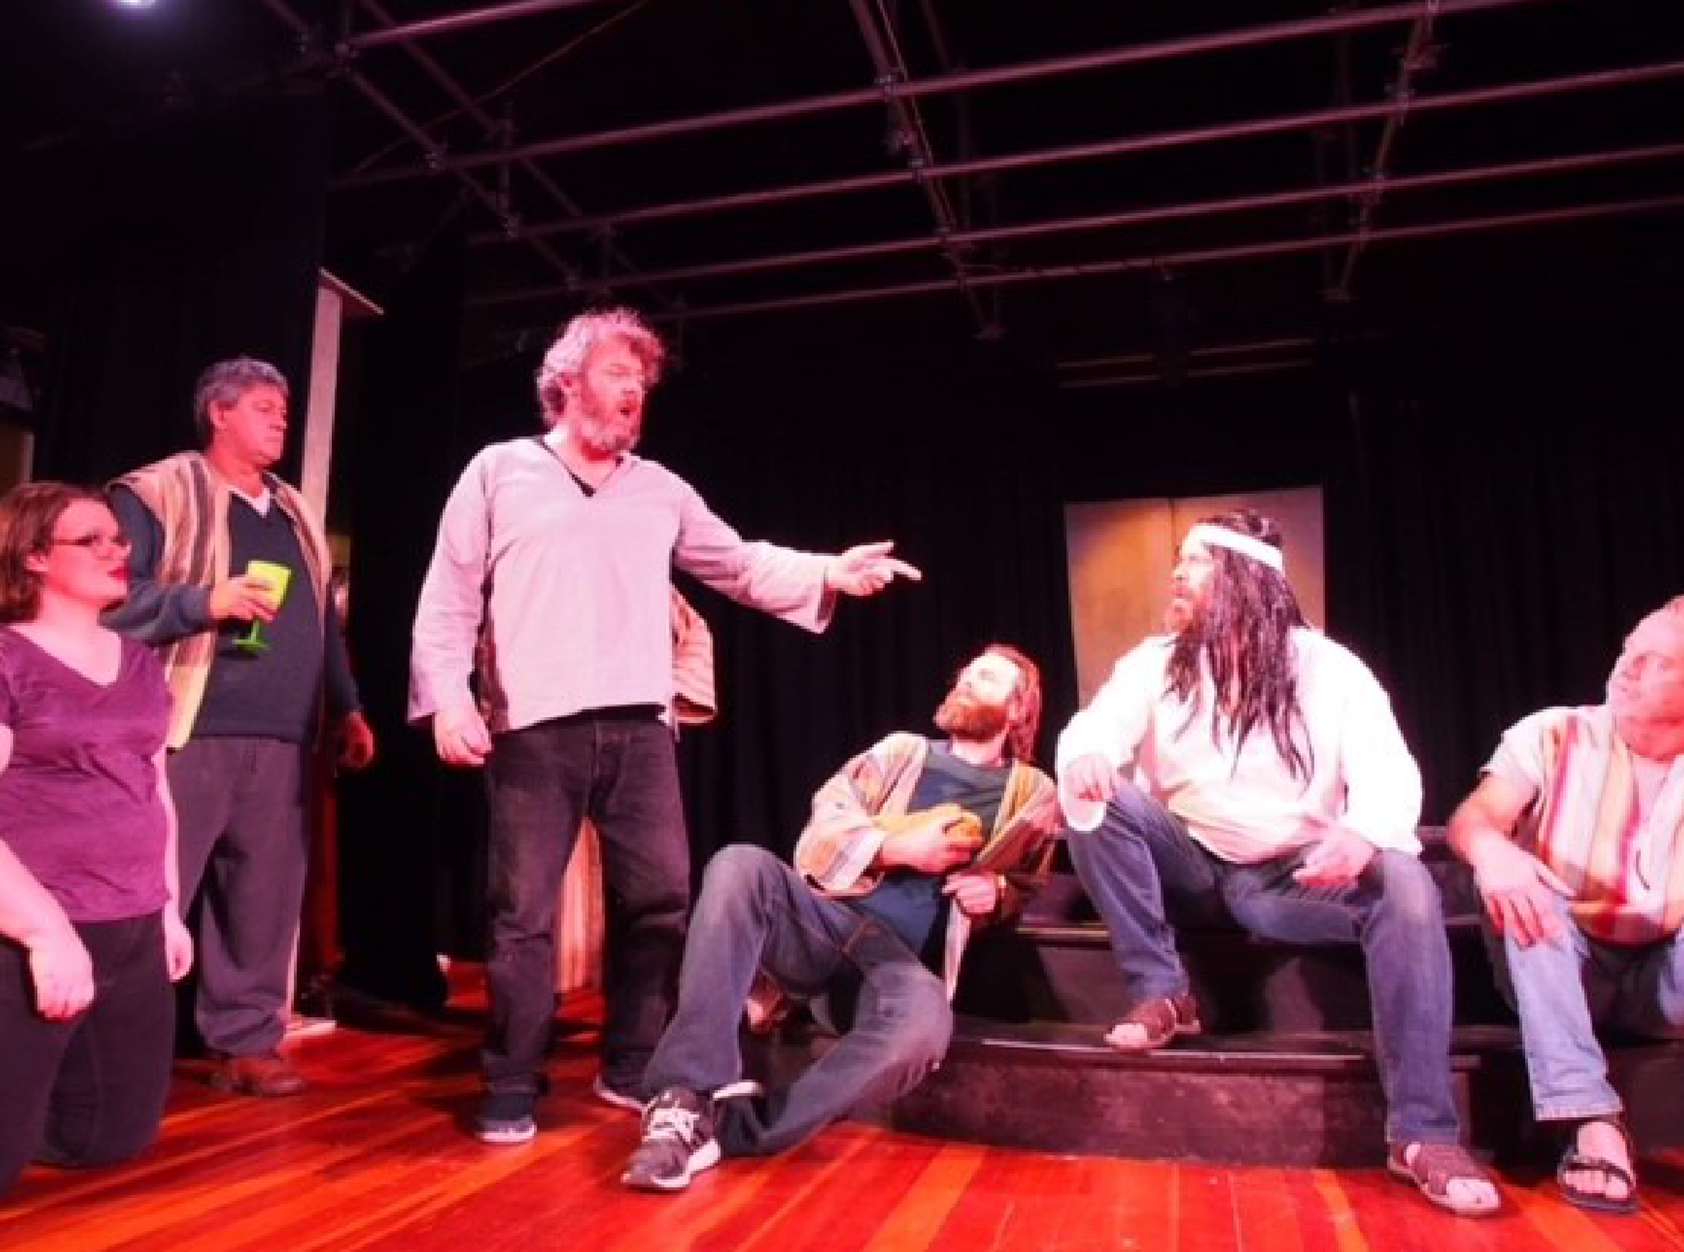 A group of people on a stage

Description automatically generated